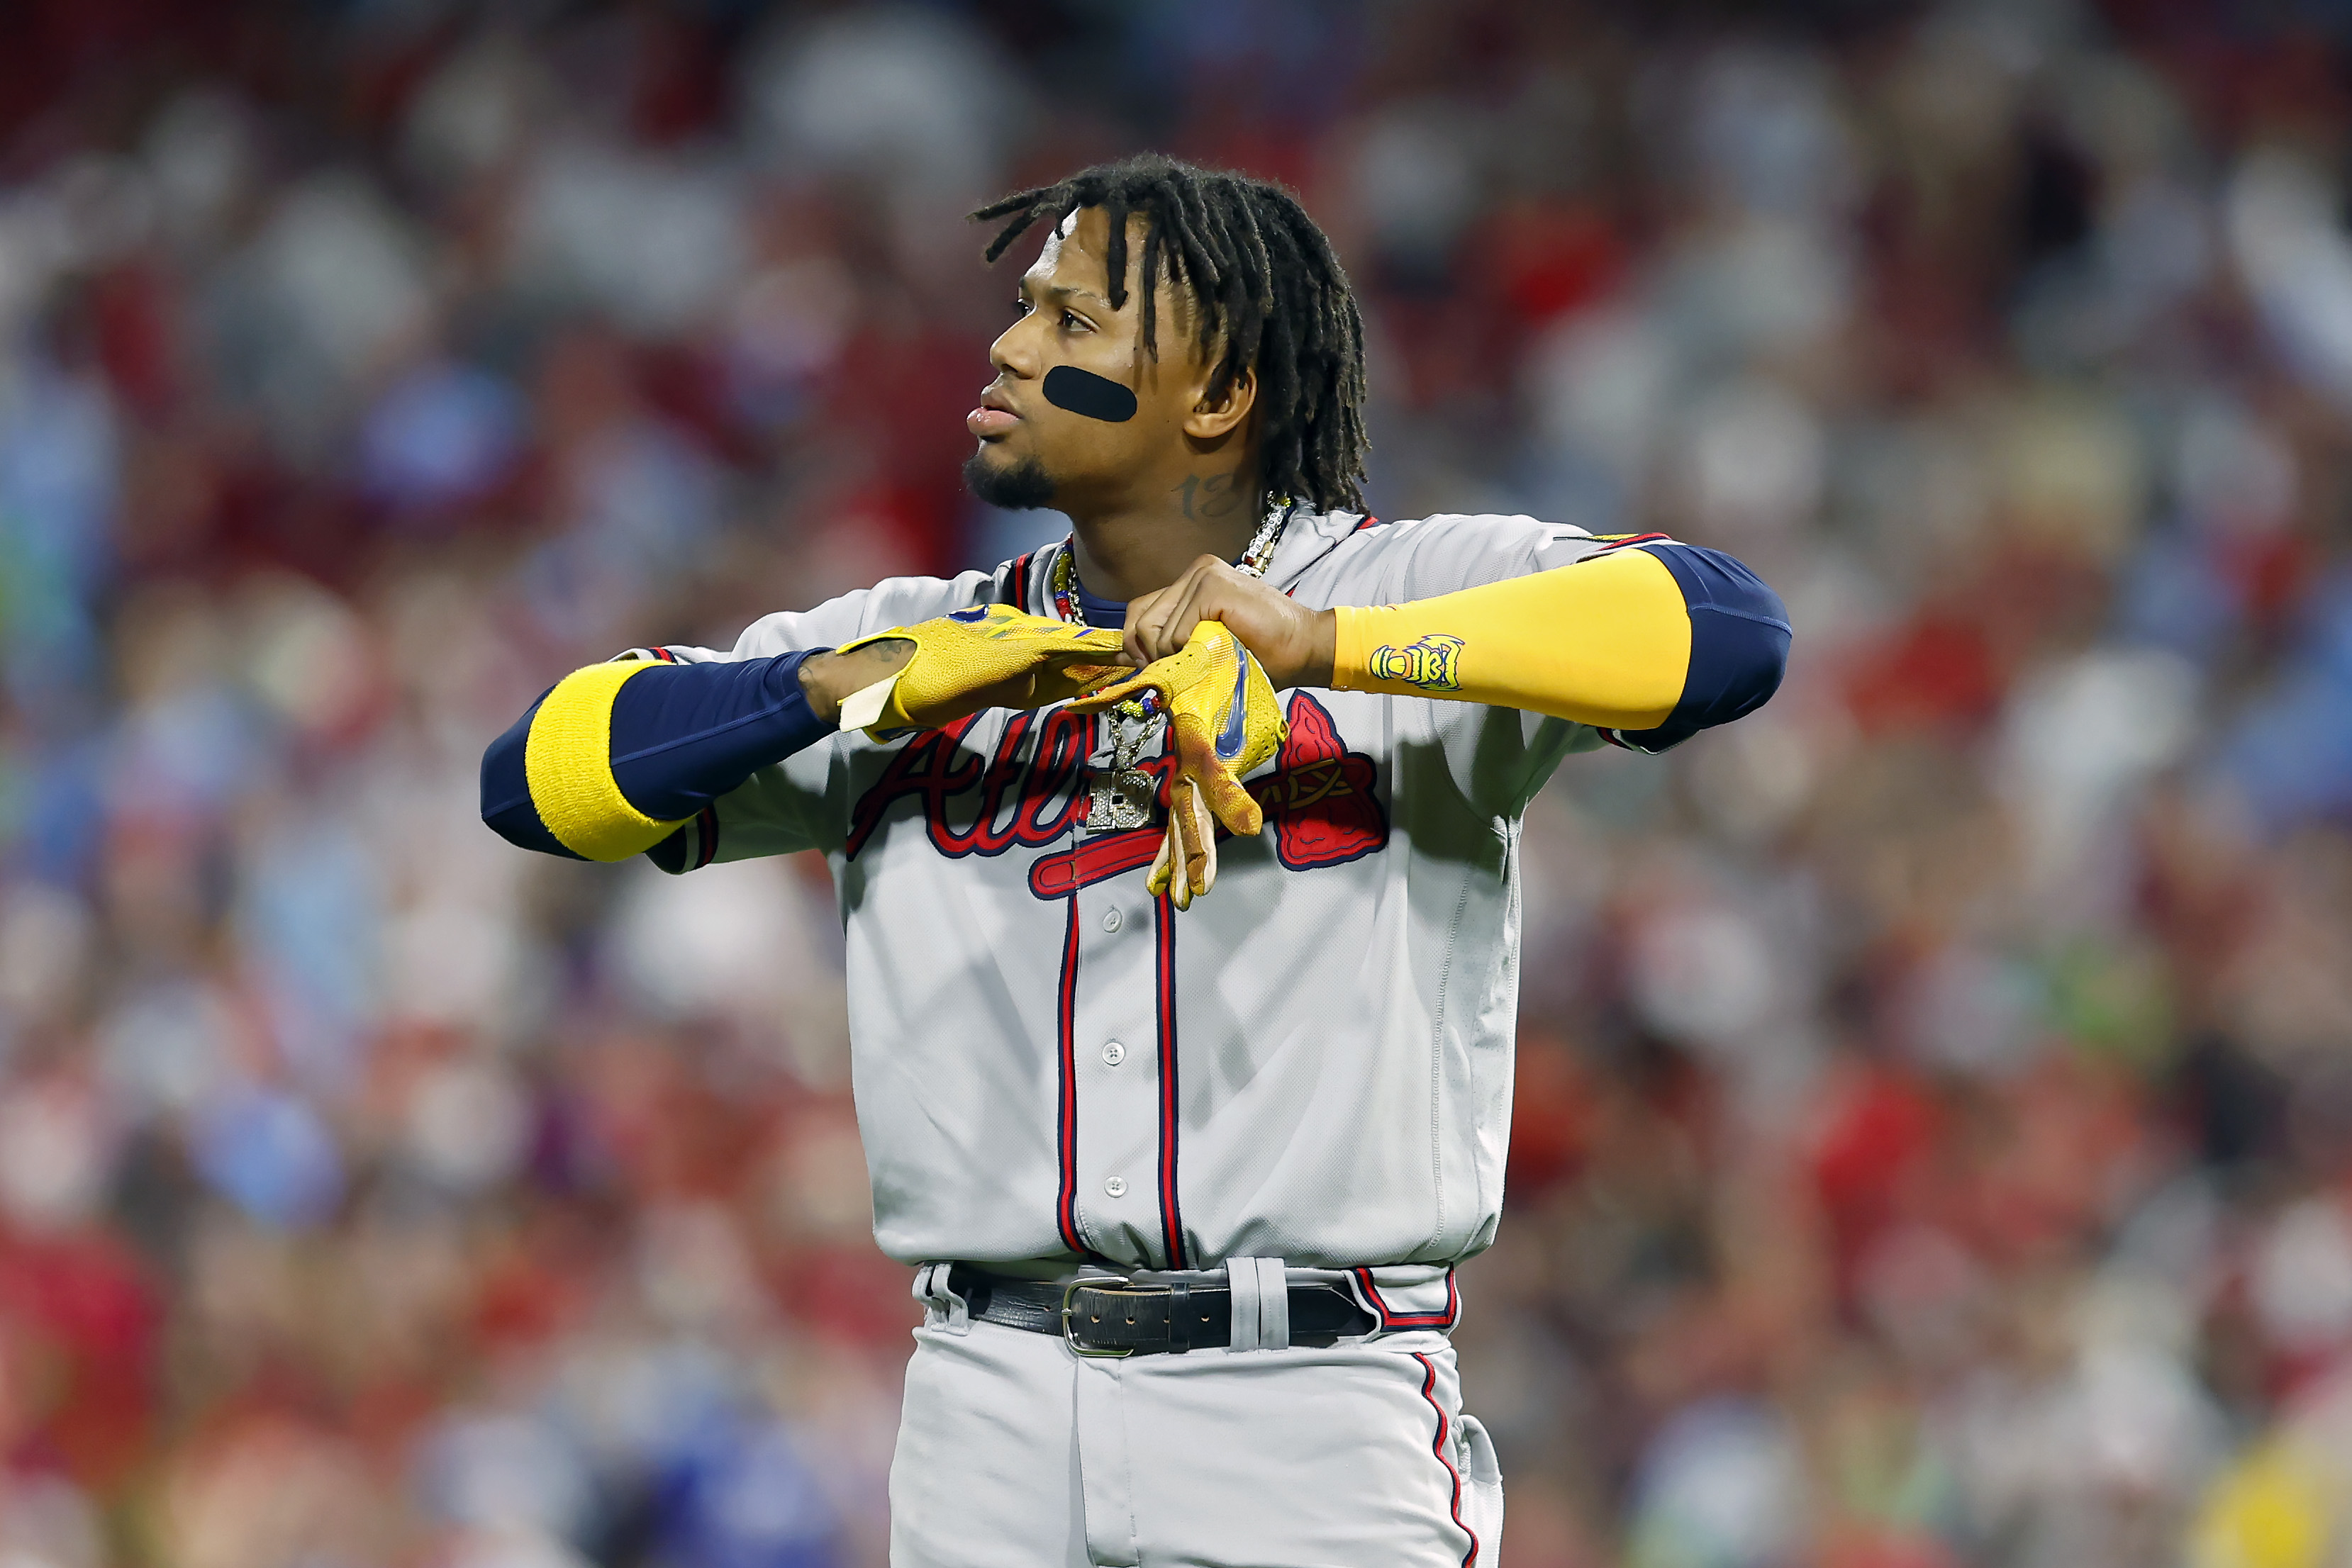 The 2020s are starting to feel like the 1990s for the Braves after